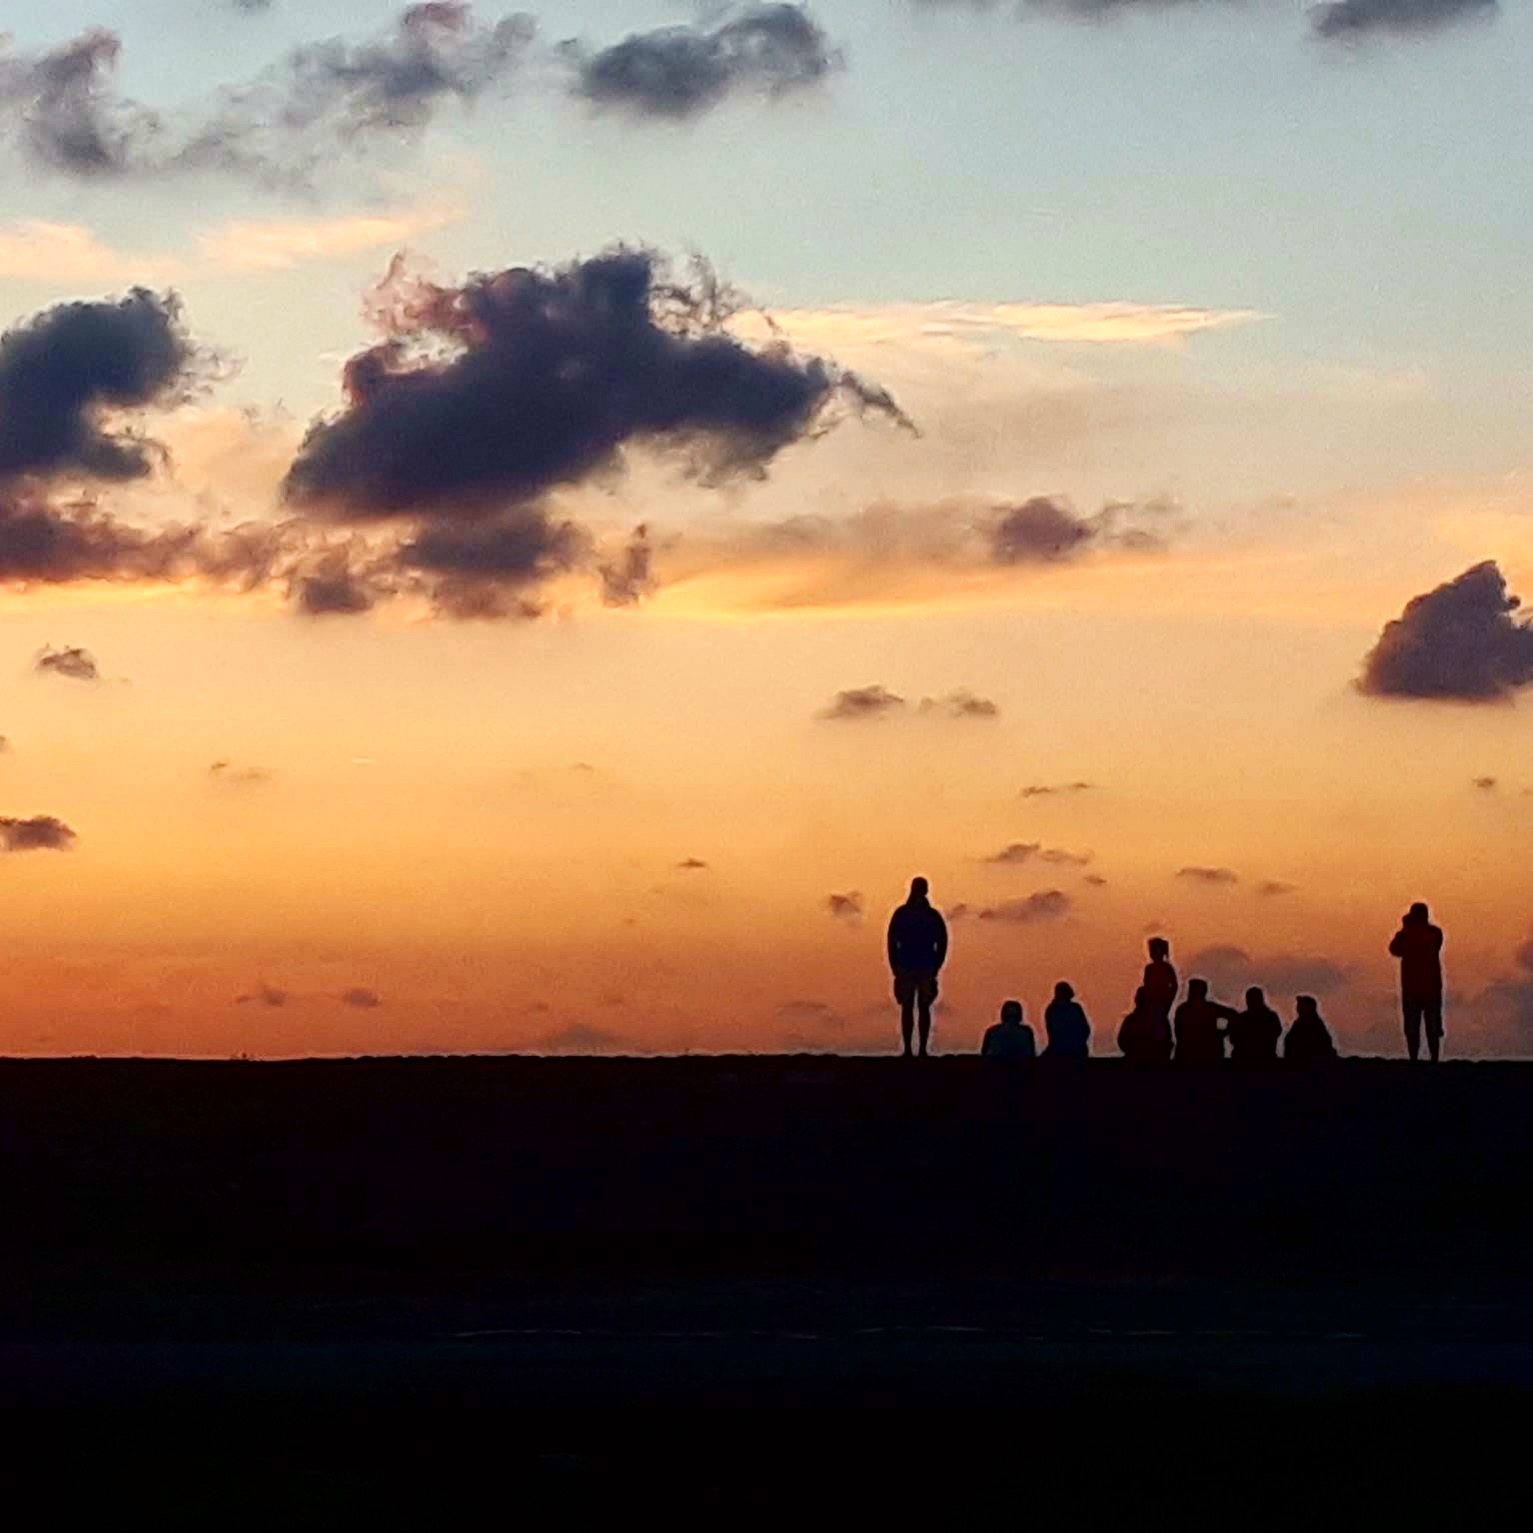 Watching the sunset on the dike in the port of Harlingen